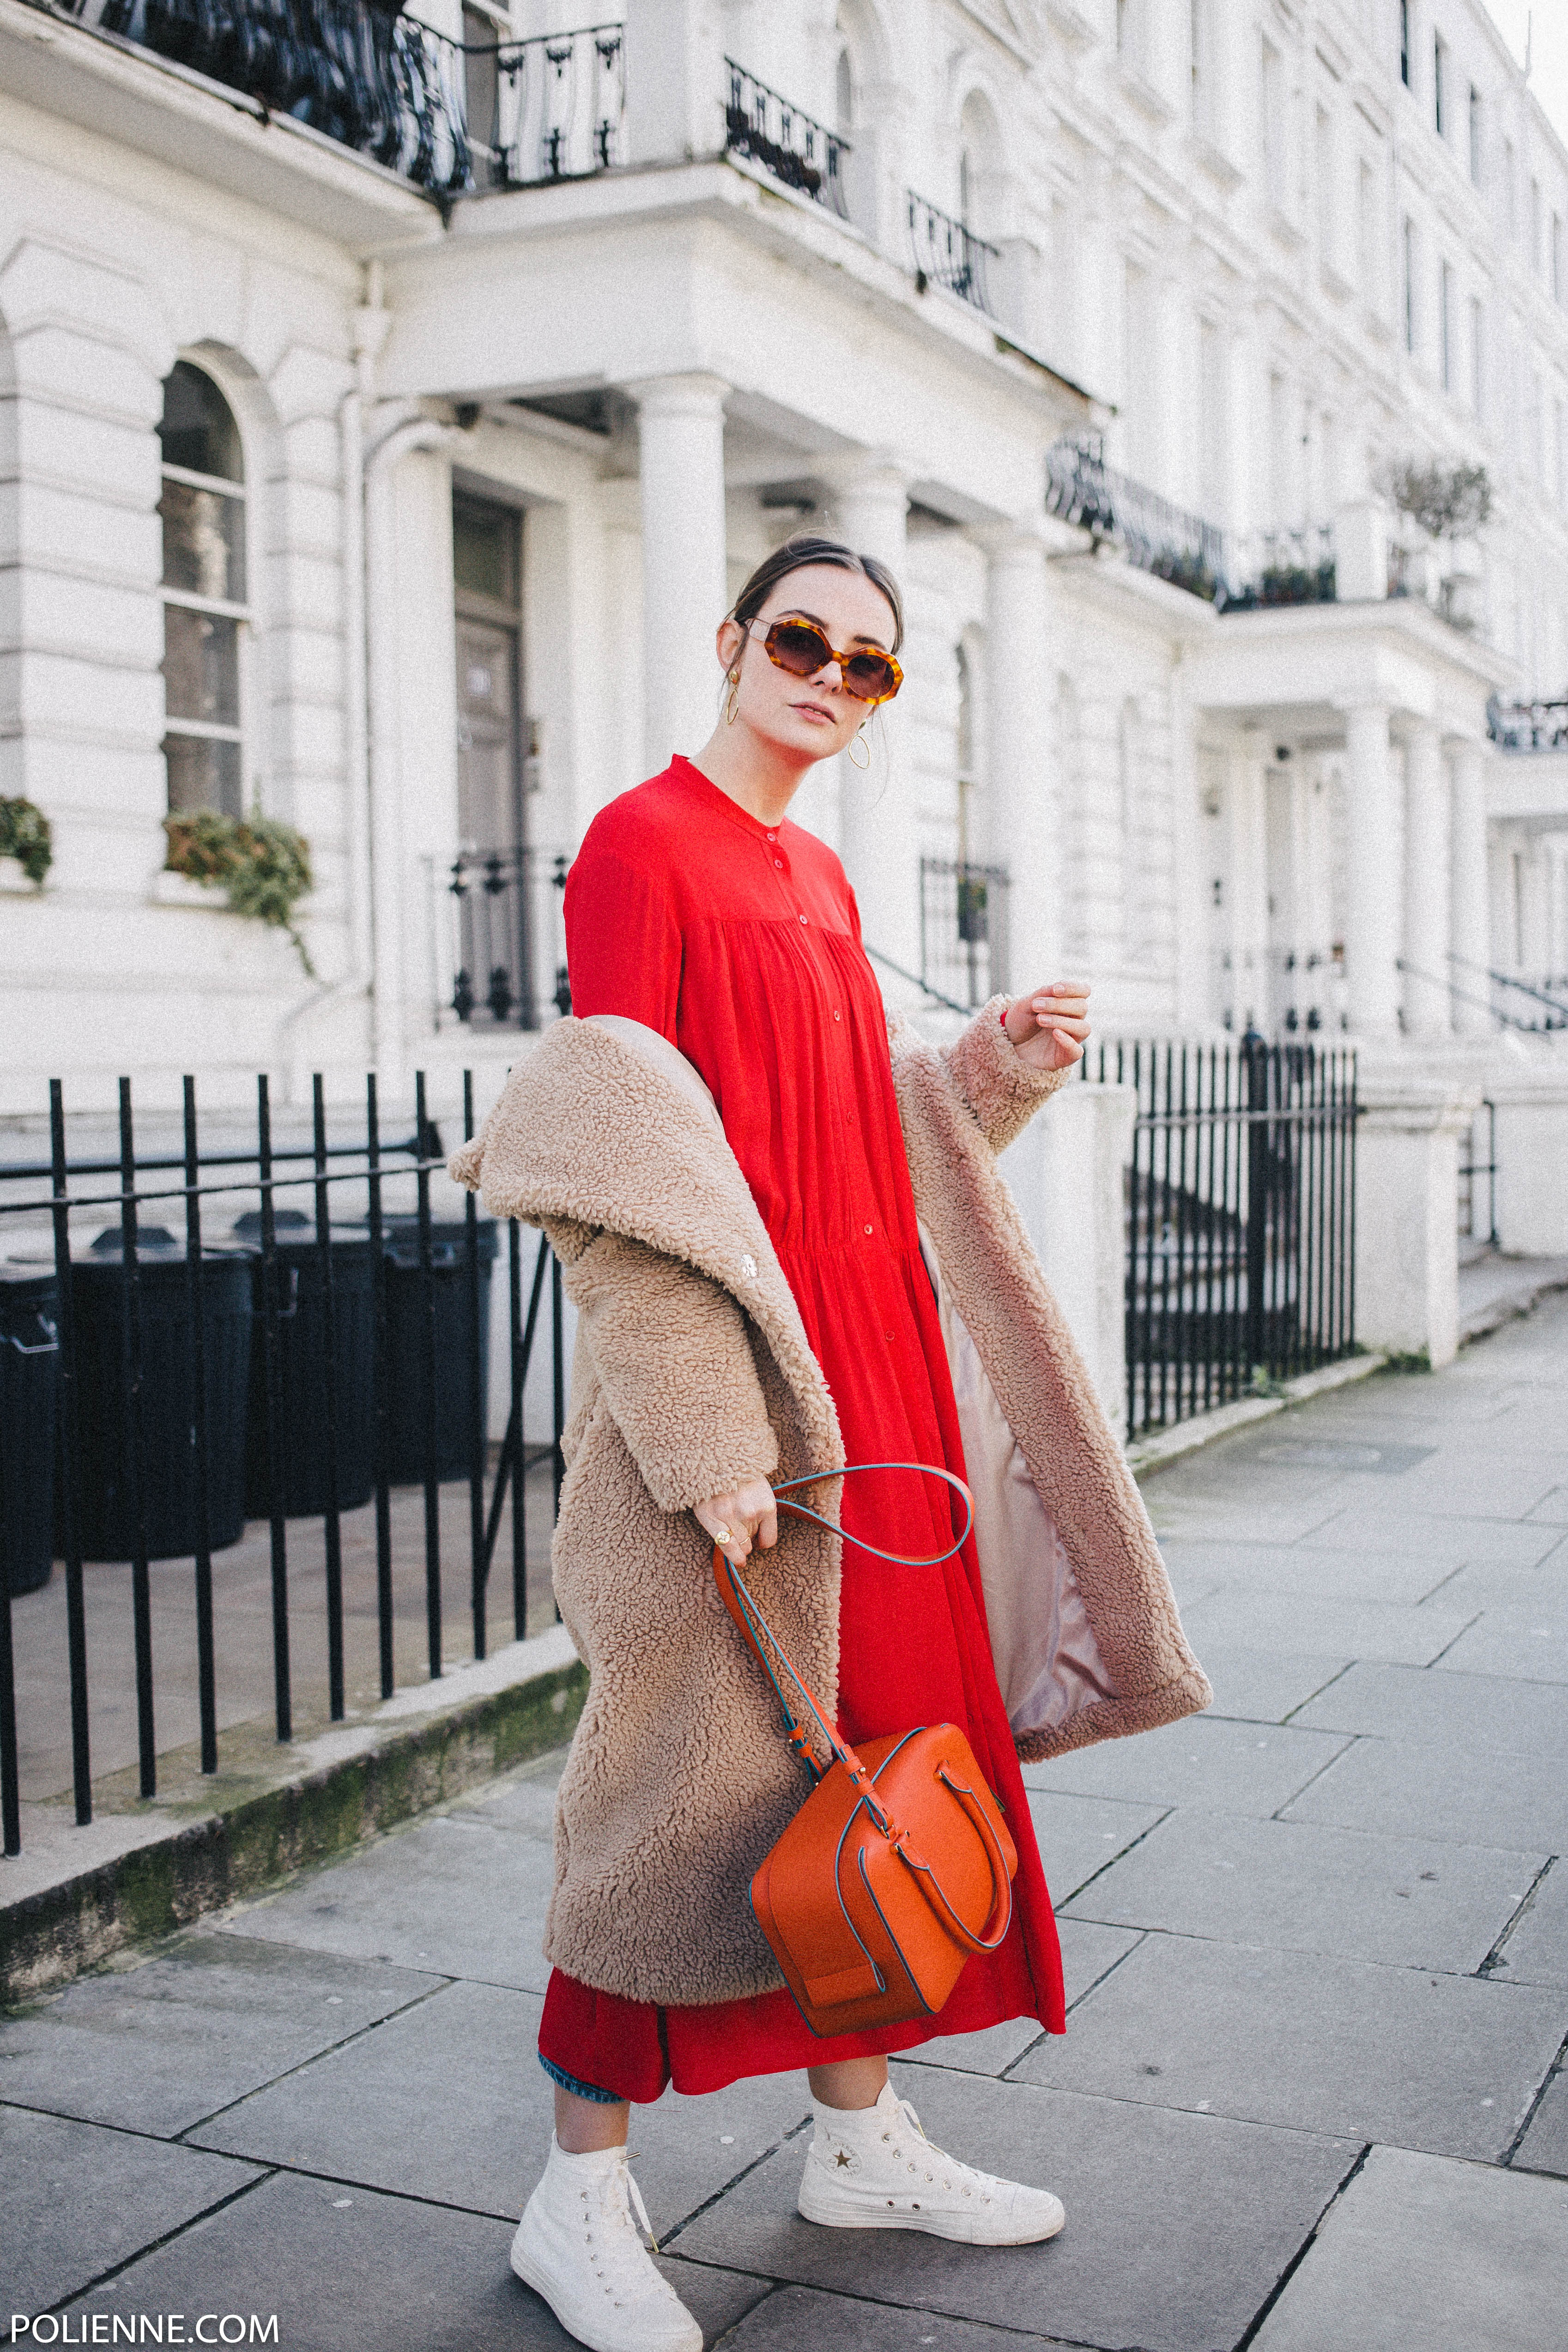 Wearing red: the do's and don'ts - polienne